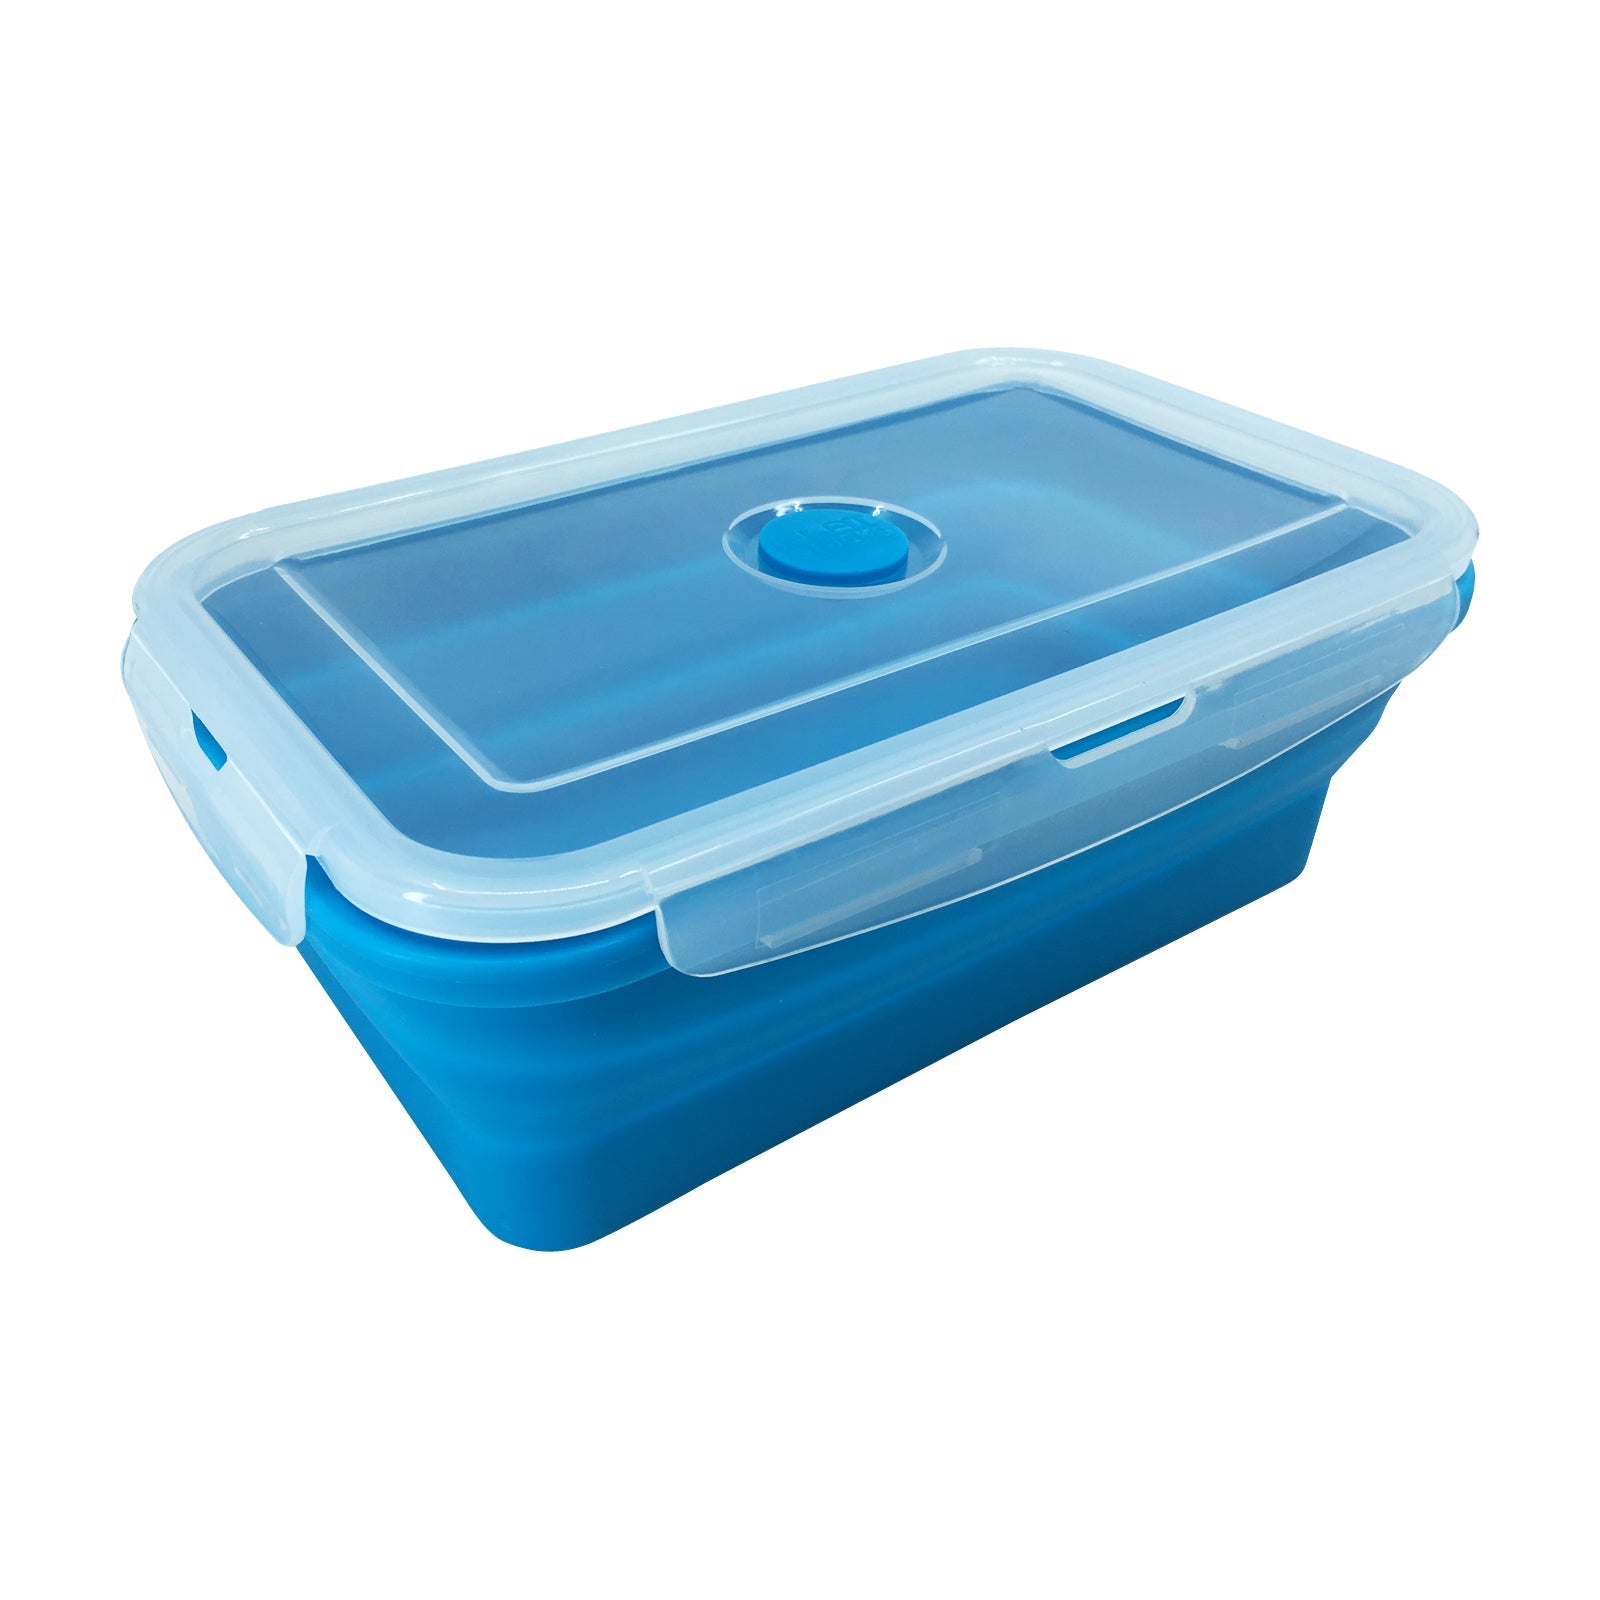 32 oz. Rectangular Plastic Spice Container with Flat Lid